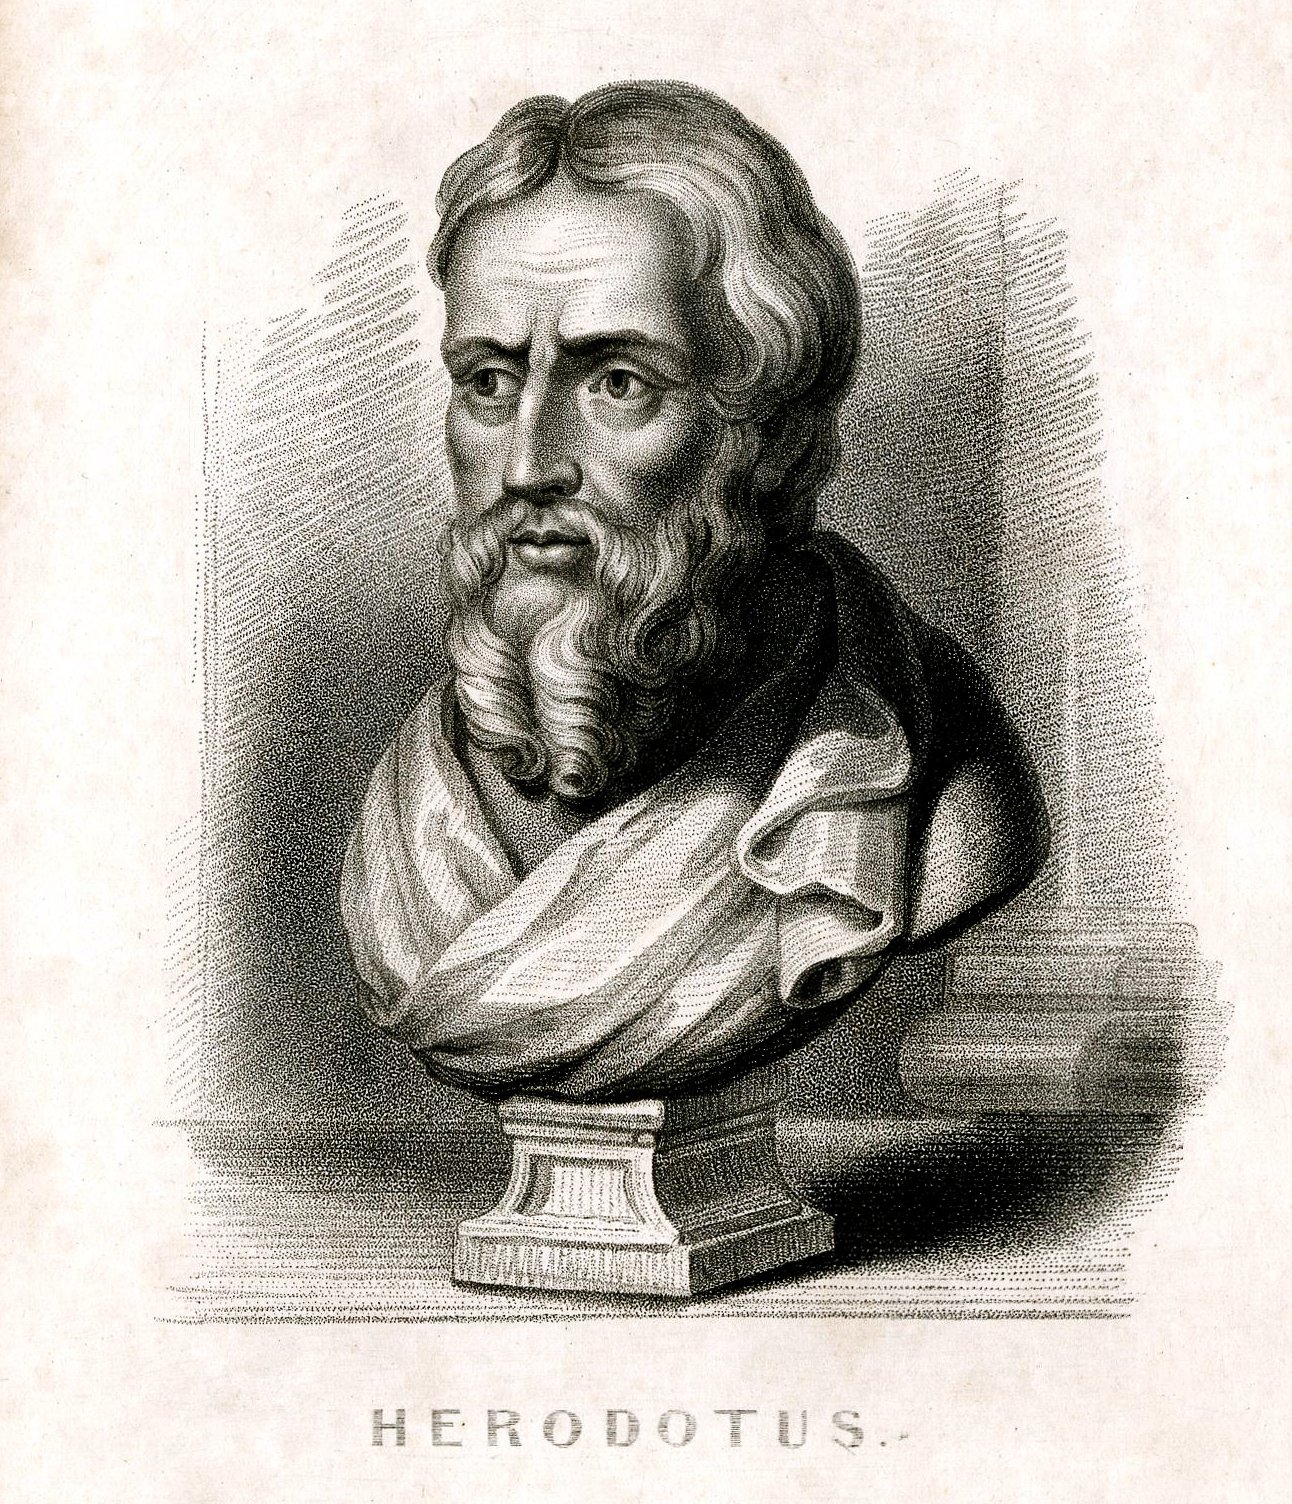 1830 portrait bust of Herodotus, oriented to the left, mounted on a plinth, inspired by an ancient sculpture